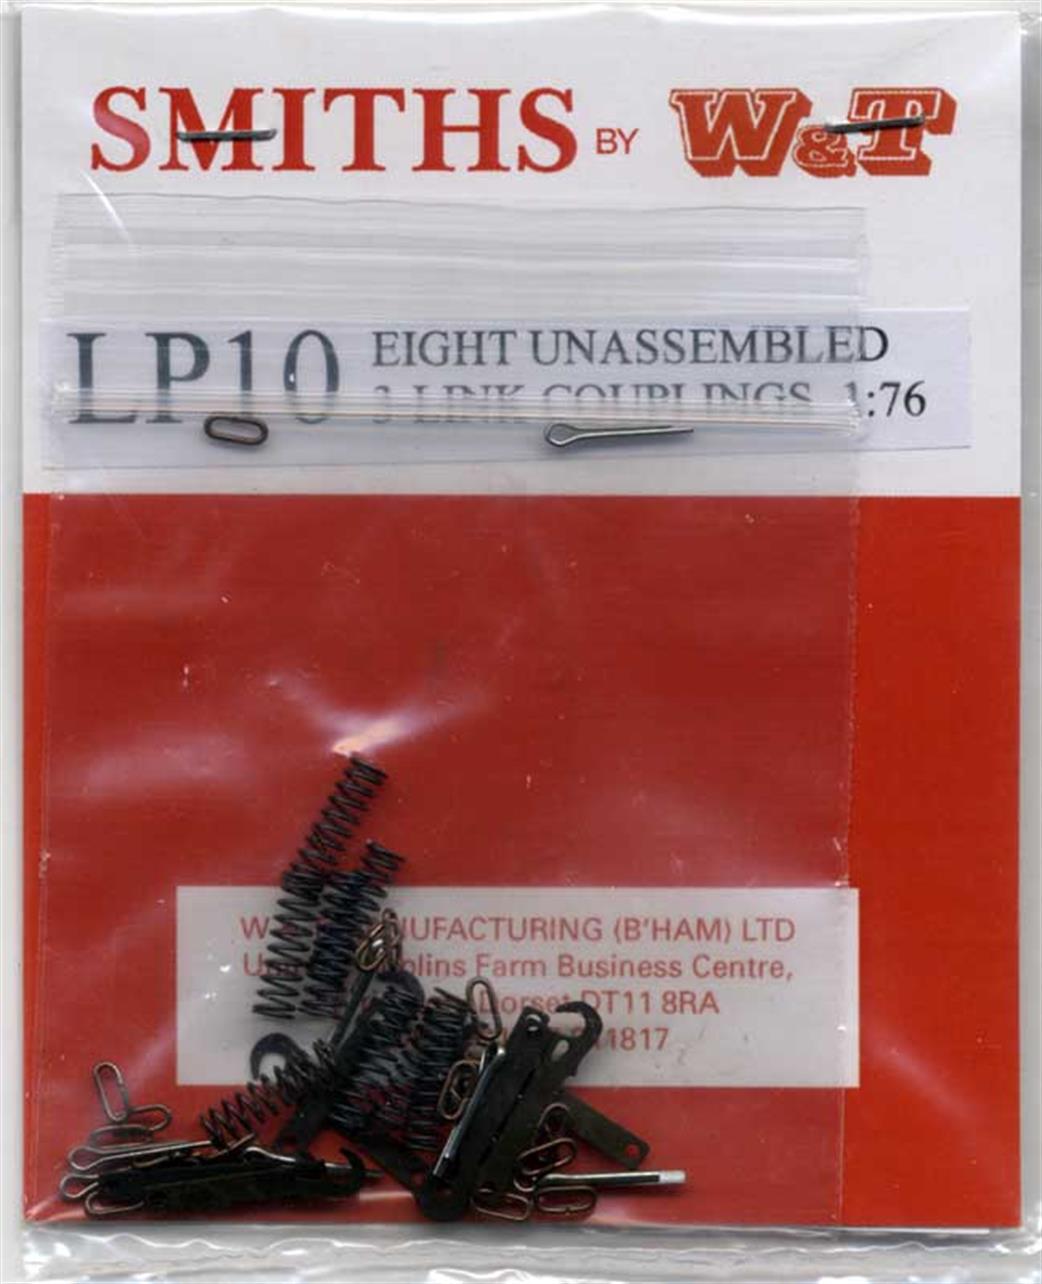 Smiths by W&T LP10 Short Length 3-Link Couplings 4 Pairs Kit OO